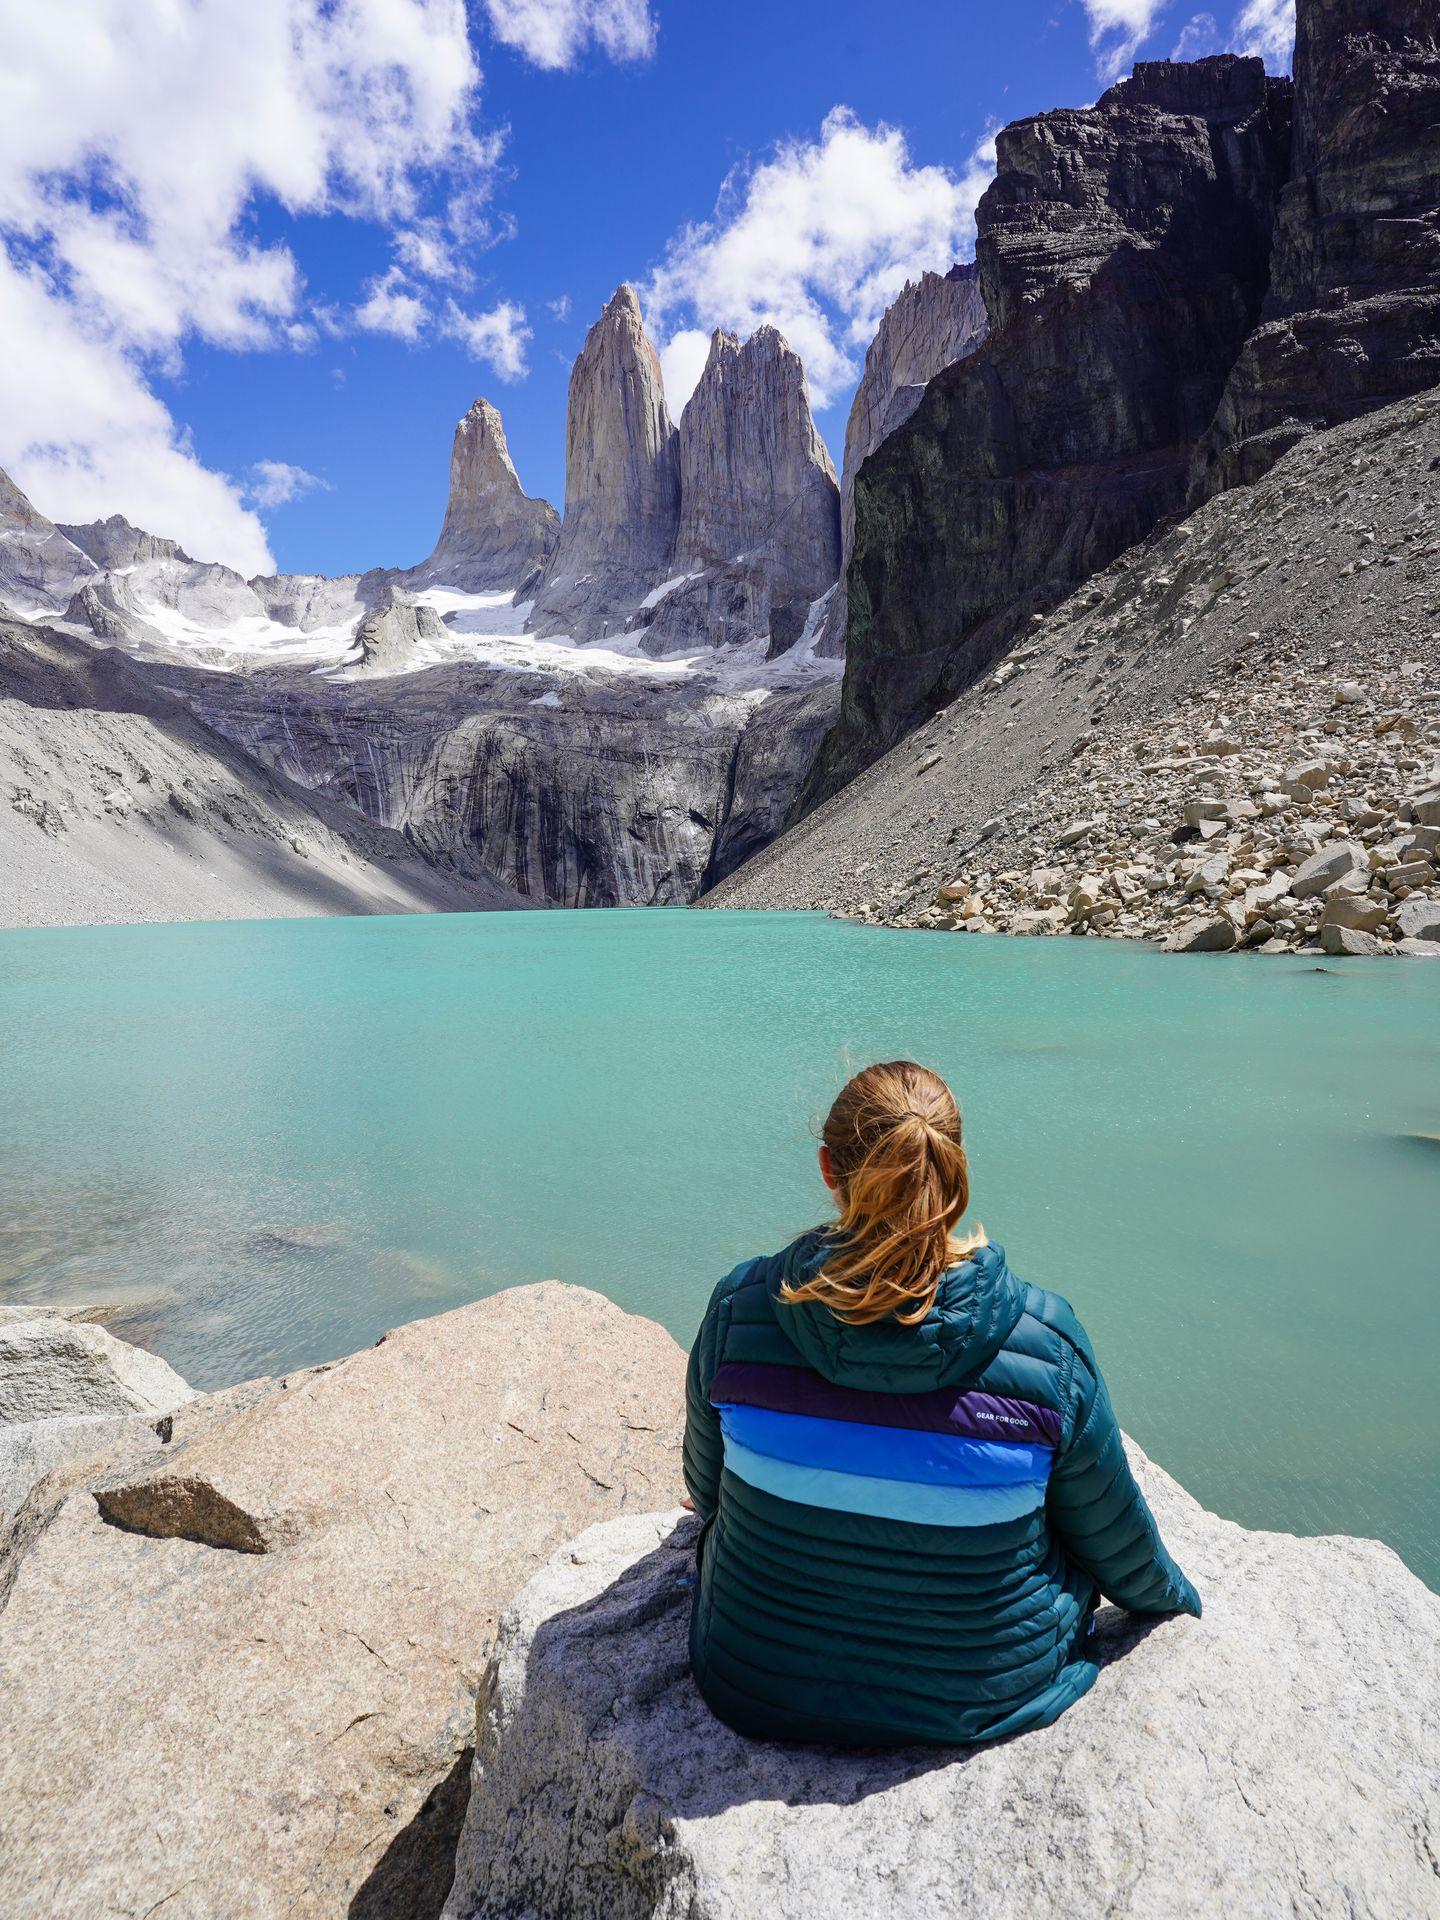 Lydia sitting and looking out at the view of Mirador Las Torres on the W Trek in Patagonia.